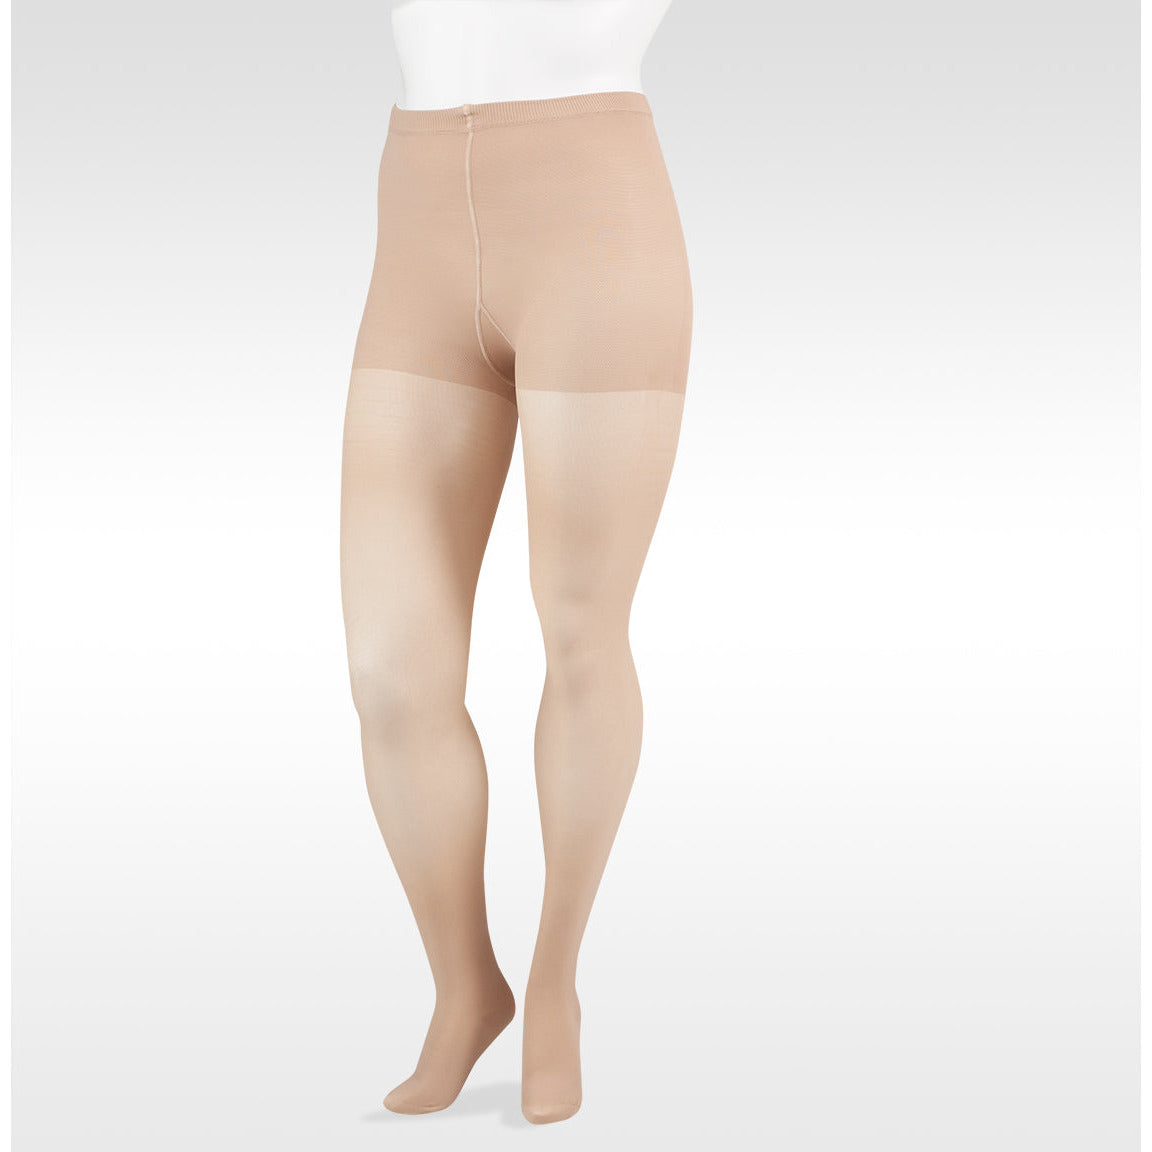 Juzo Soft 2082 Support Pantyhose with Elastic Panty 30-40mmHg – Compression  Stockings